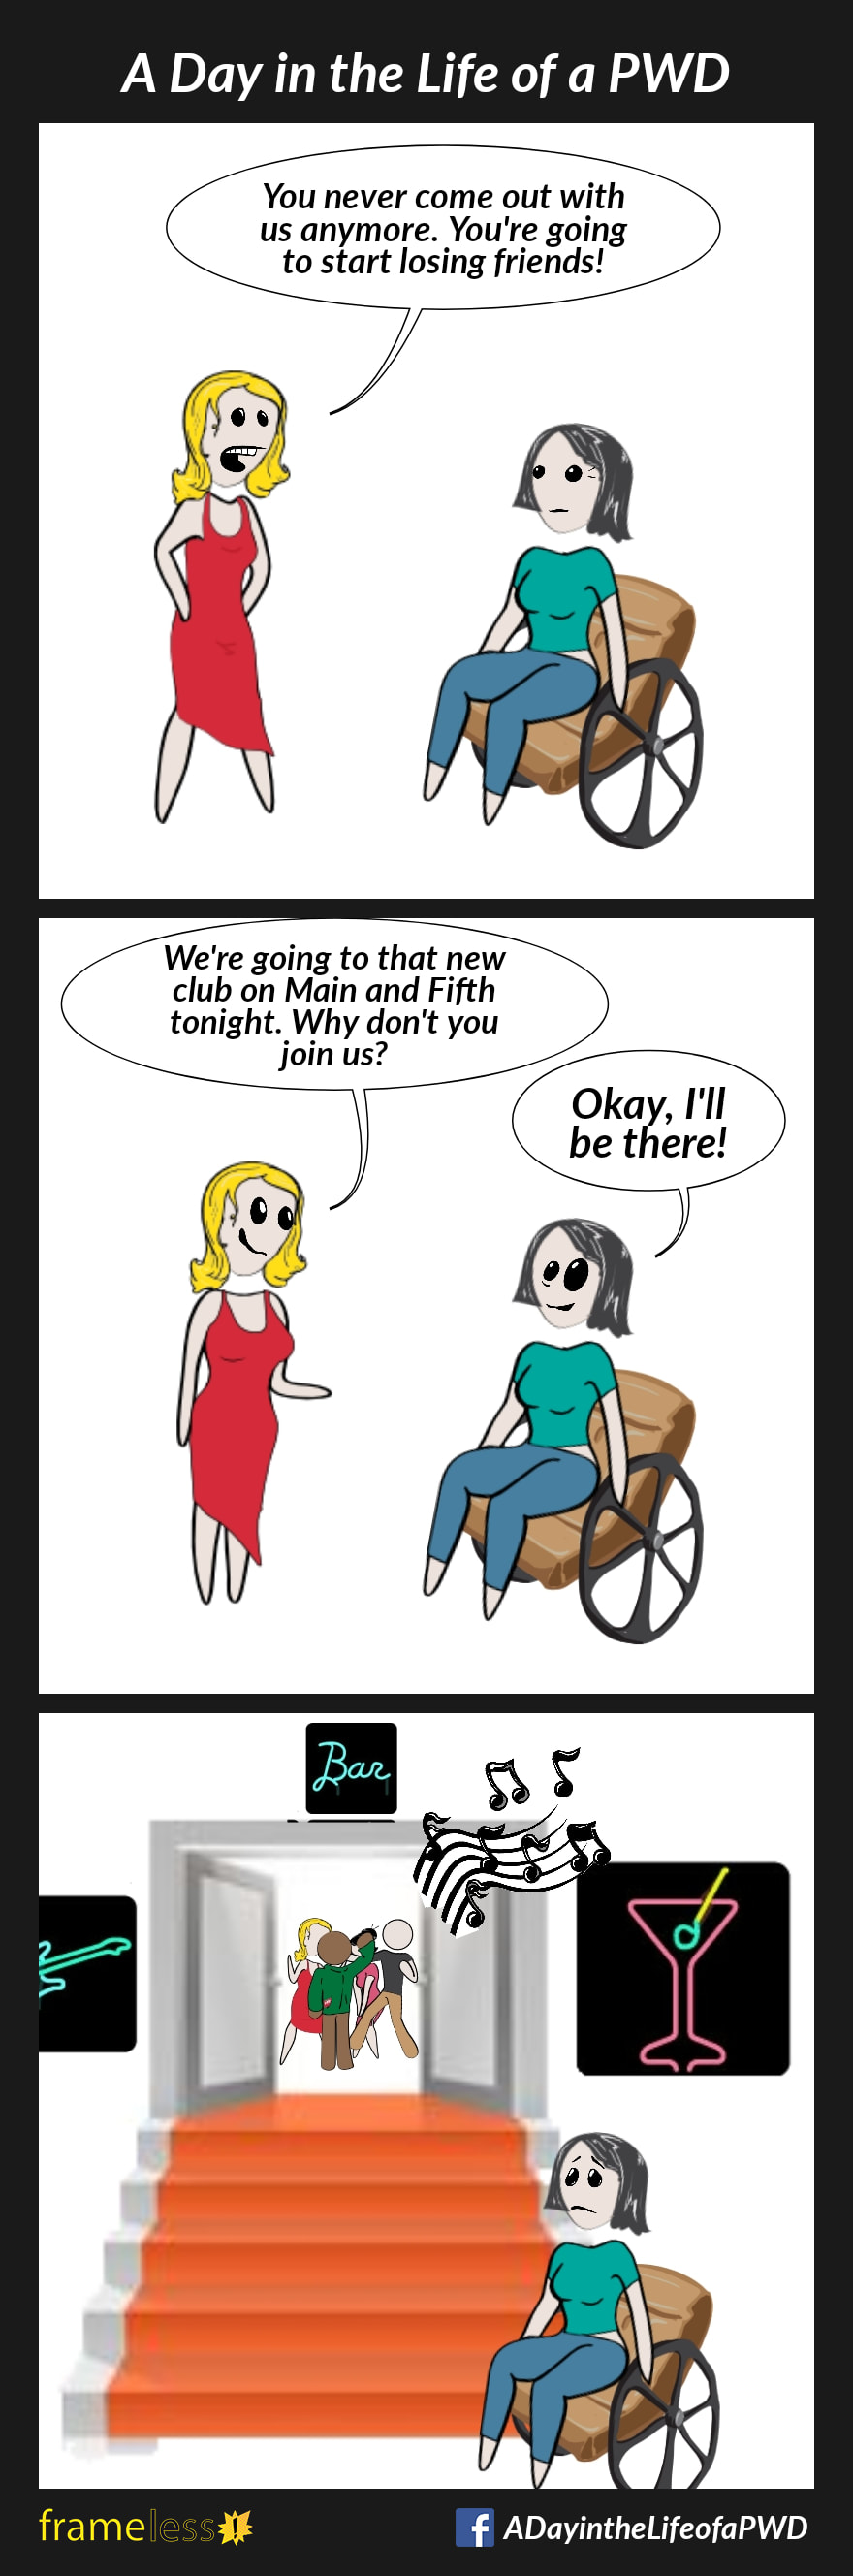 COMIC STRIP 
A Day in the Life of a PWD (Person With a Disability) 

Frame 1:
A woman in a wheelchair is talking to her friend.
FRIEND: You never come out with us anymote. You're going to start losing friends!

Frame 2:
FRIEND: We're going to that new club on Main and Fifth tonight. Why don't you join us?
WOMAN: Okay, I'll be there!

Frame 3:
The woman is outside the nightclub. Her friends are dancing inside. There are stairs leading to the front door.